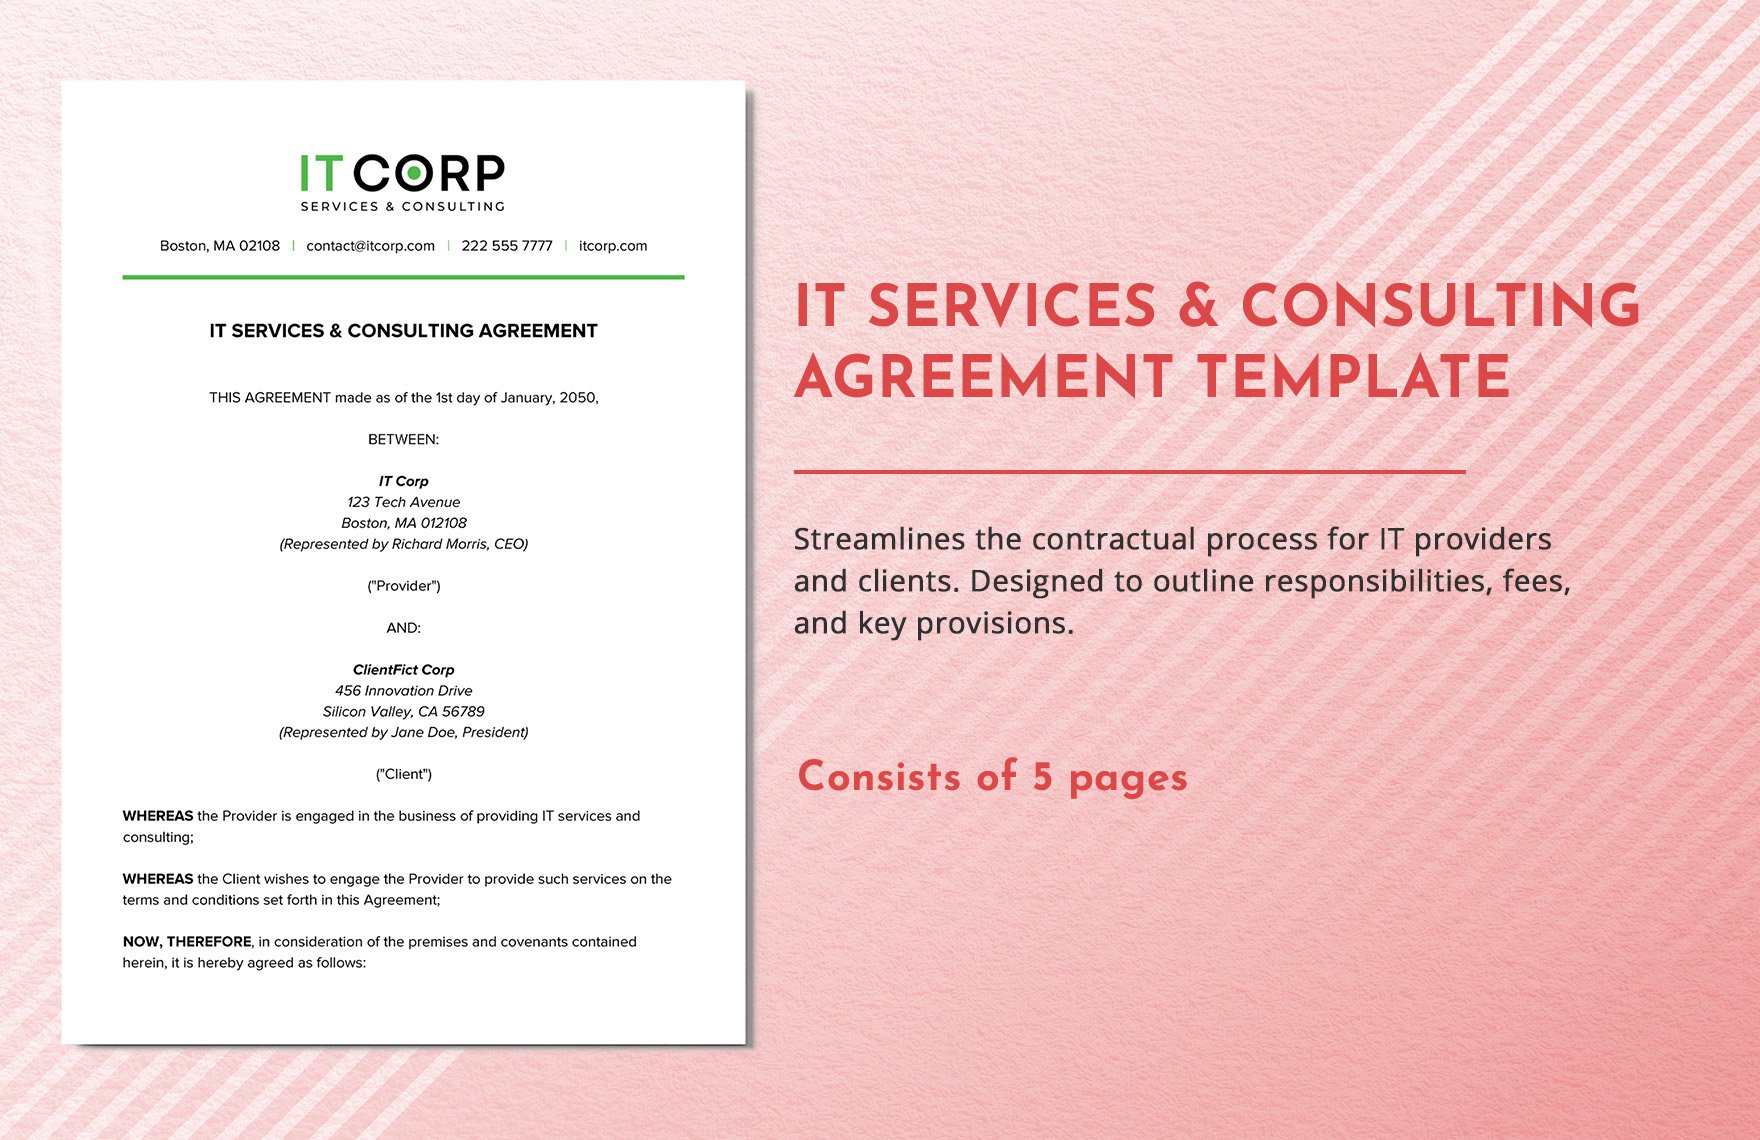 IT Services & Consulting Agreement Template